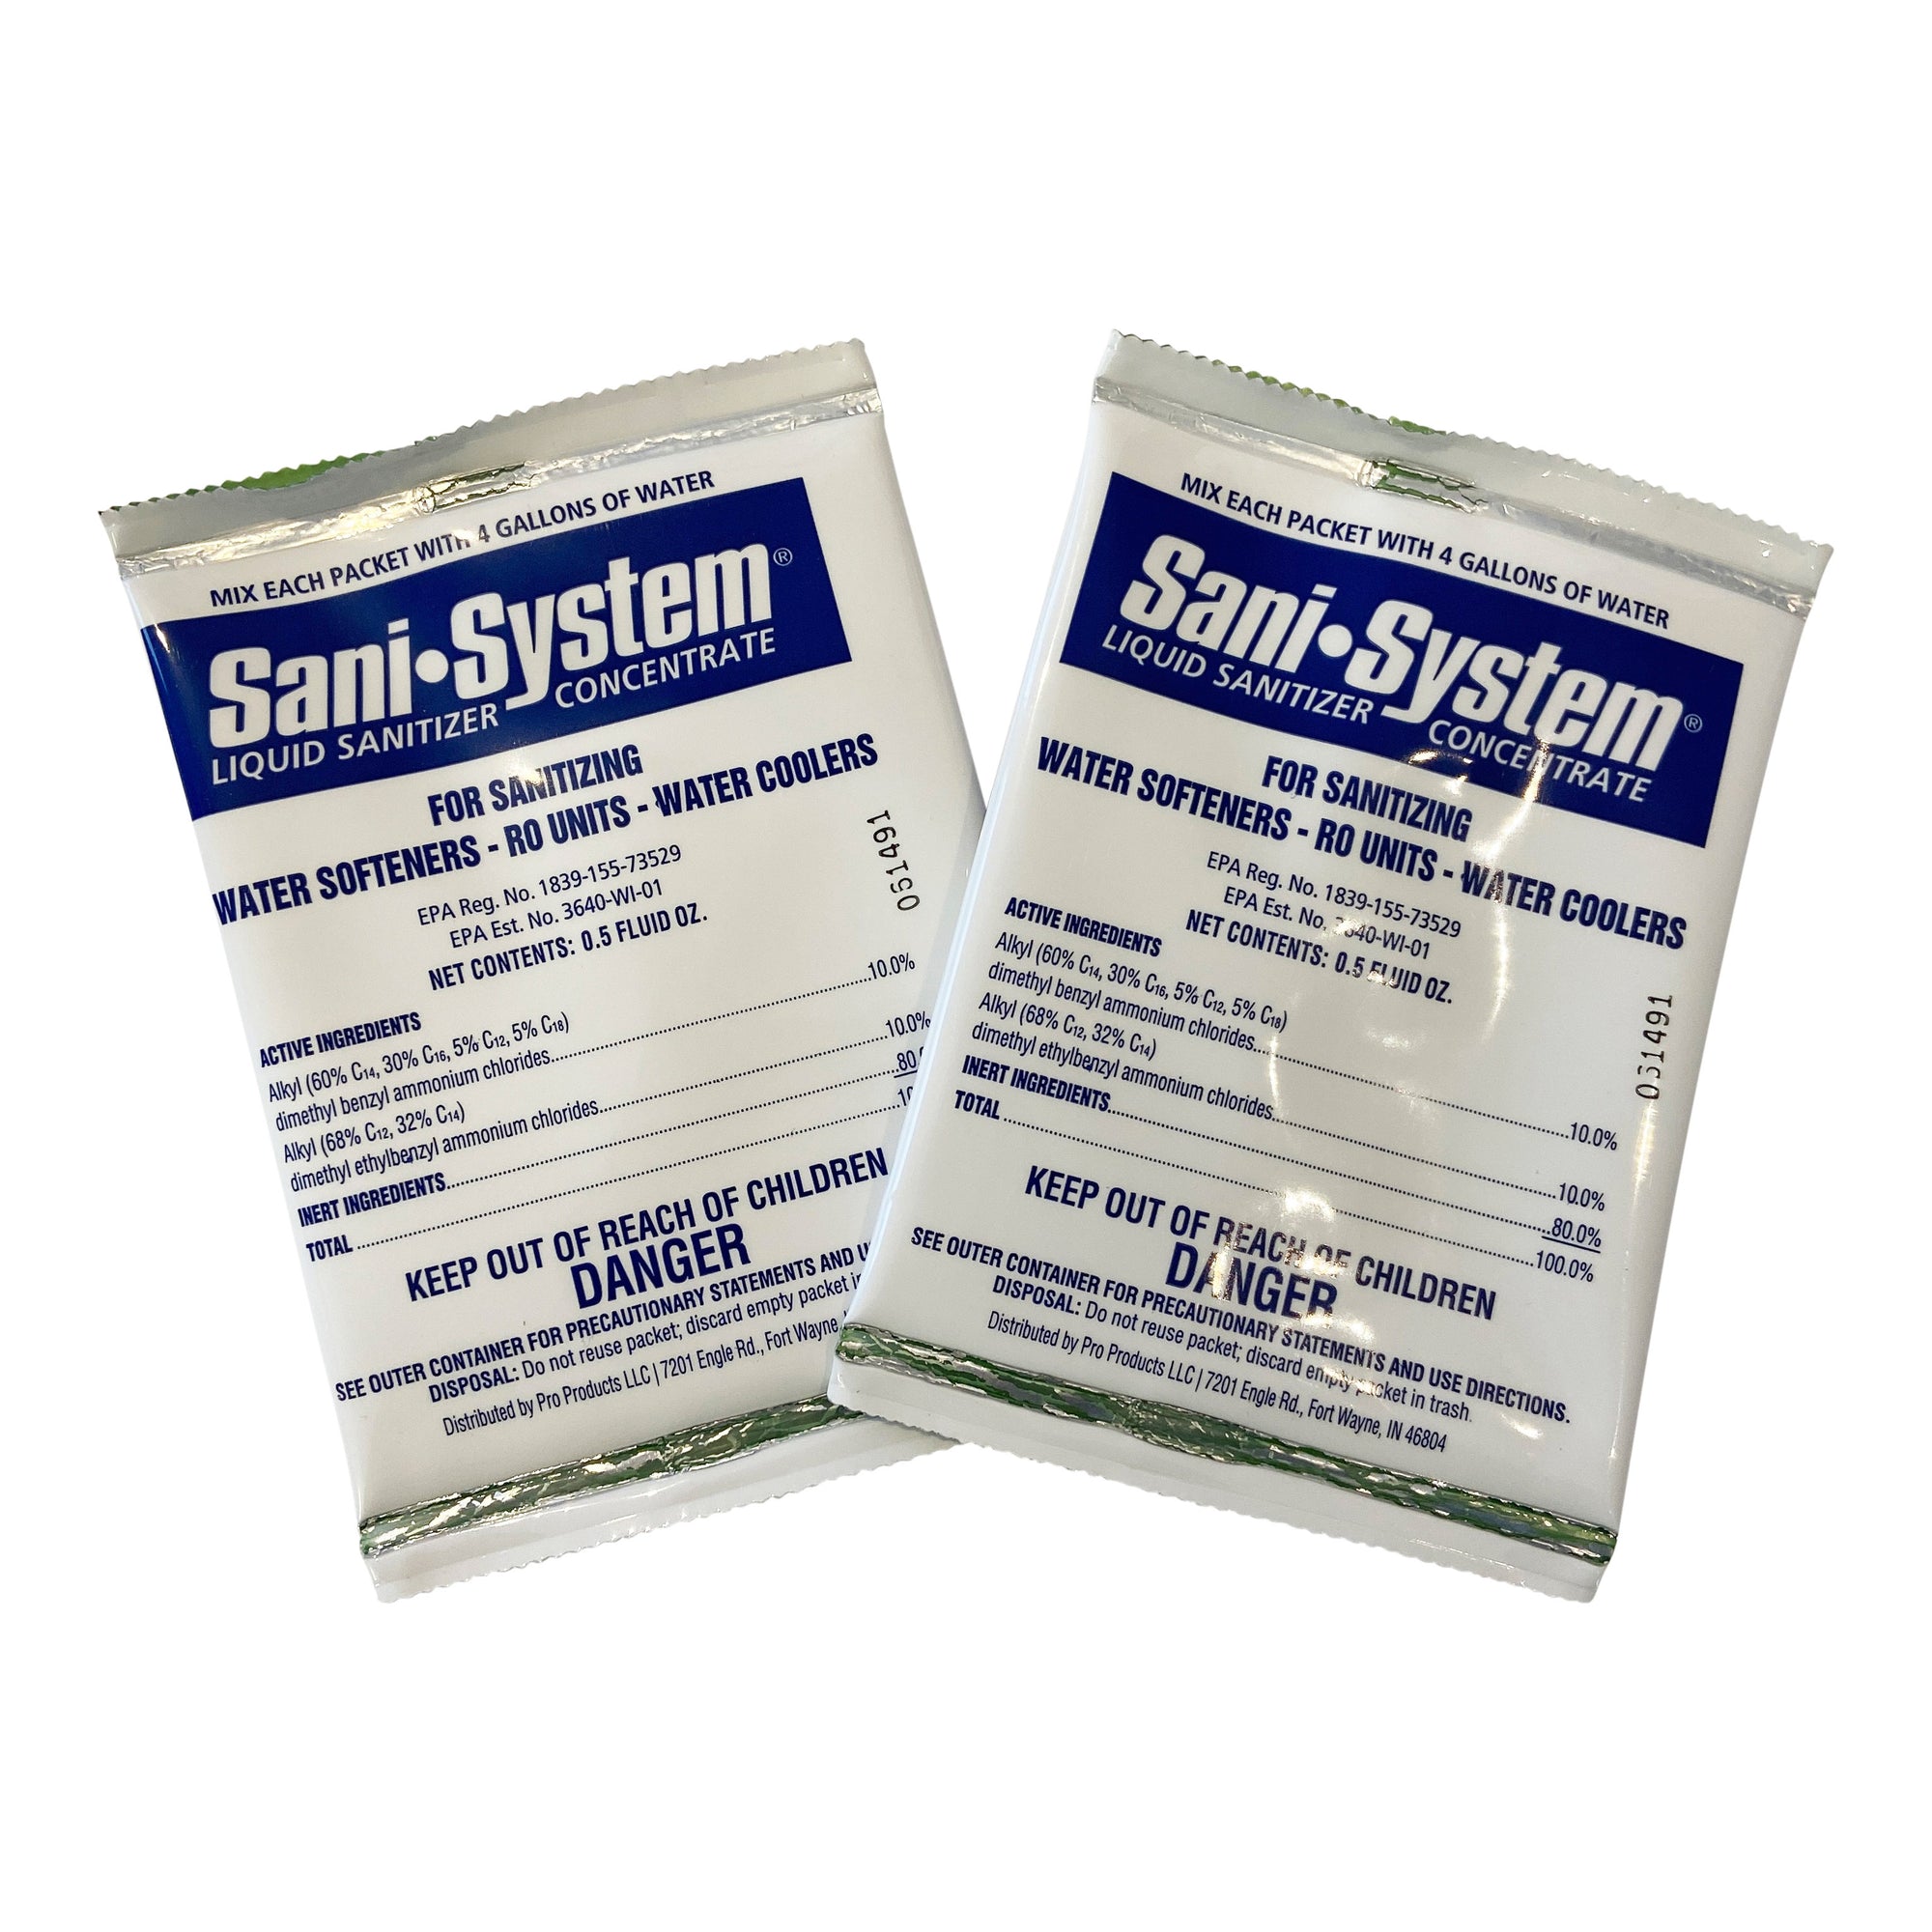 Pro Products Sani System Water Softener Disinfectant 2 Pack